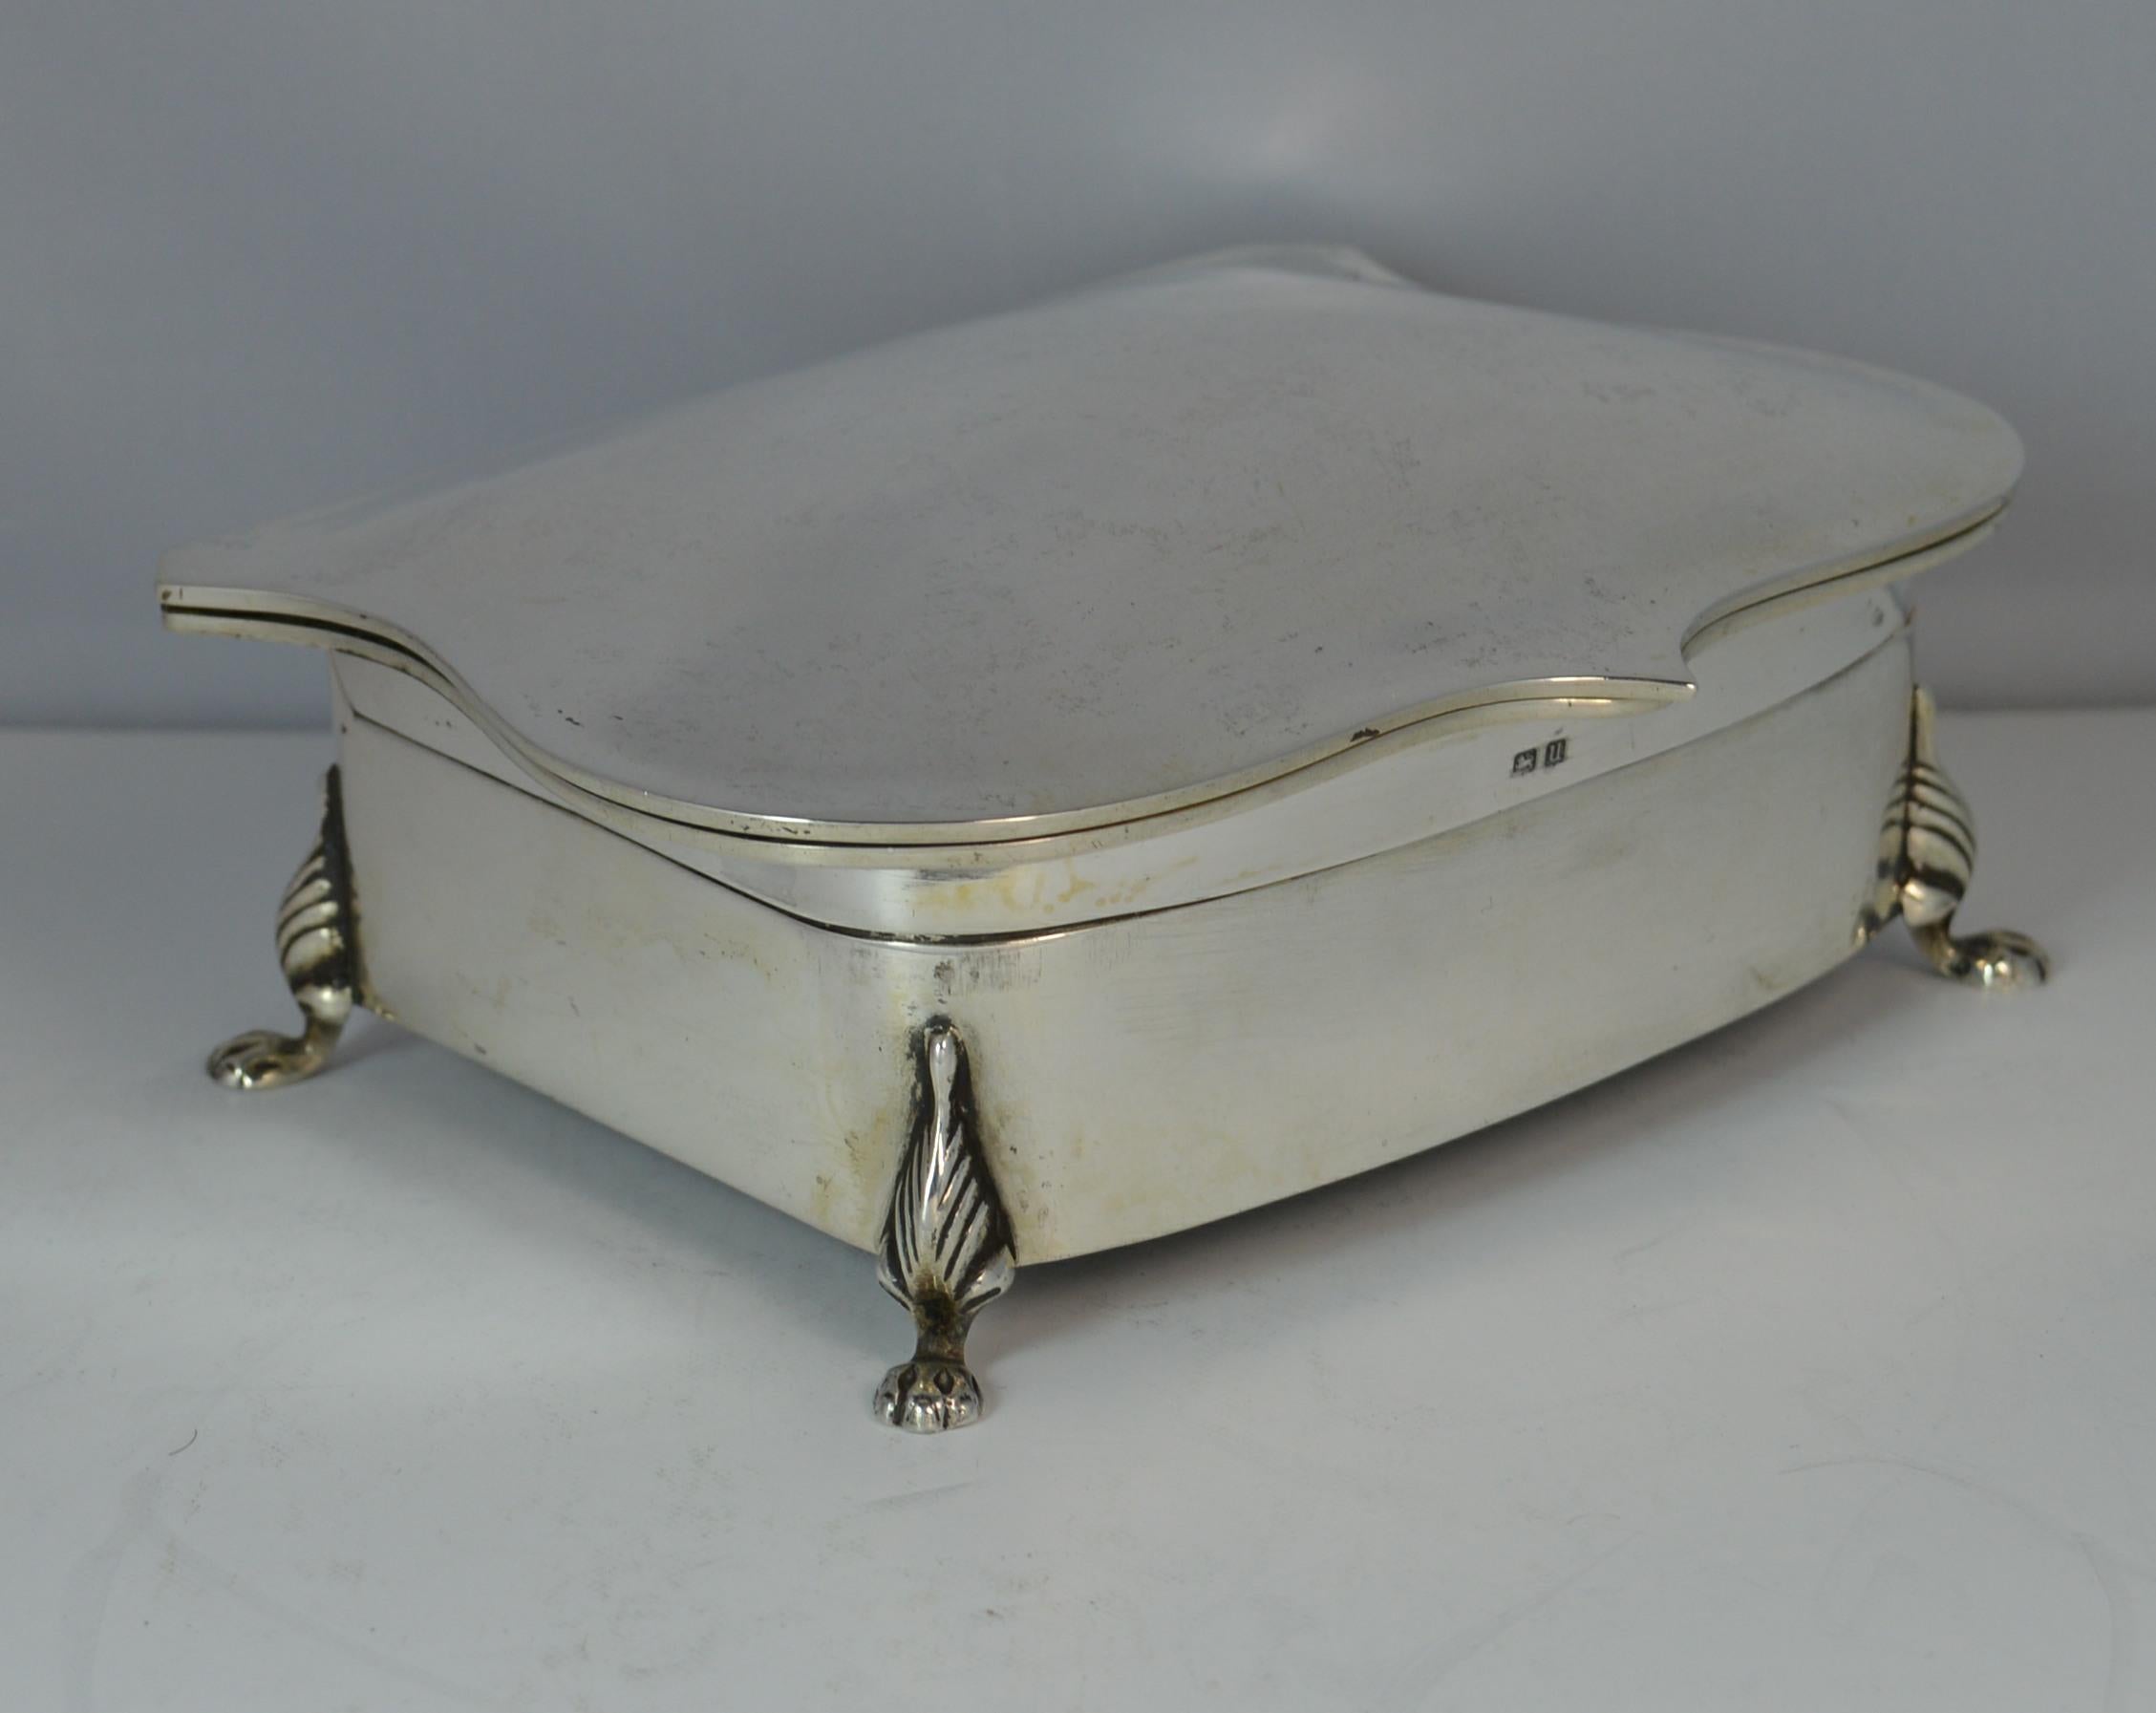 A beautiful English made solid silver jewellery box.
Stylish shaped piece with plain finish throughout and standing on four lion feet.
Unusual design with top tier for thirteen rings and the tier below plain for chains, pendants etc.

Hallmarks ;